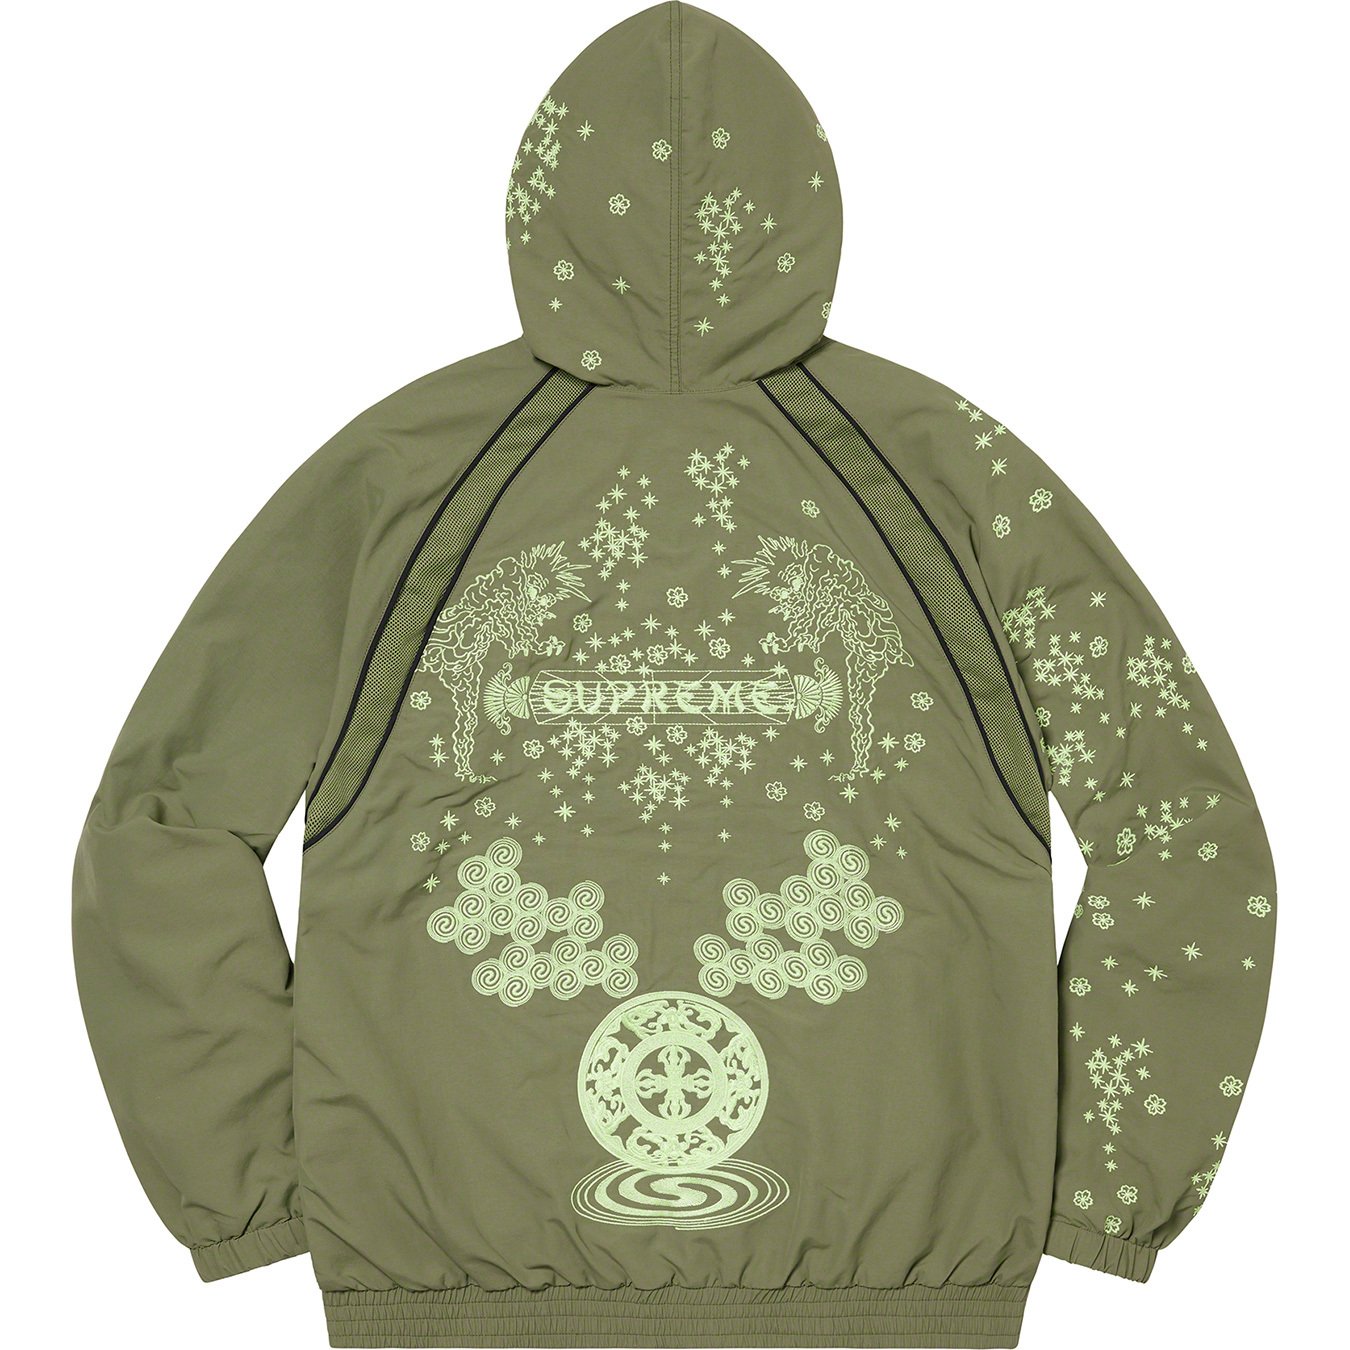 AOI Glow-in-the-Dark Track Jacket - spring summer 2022 - Supreme